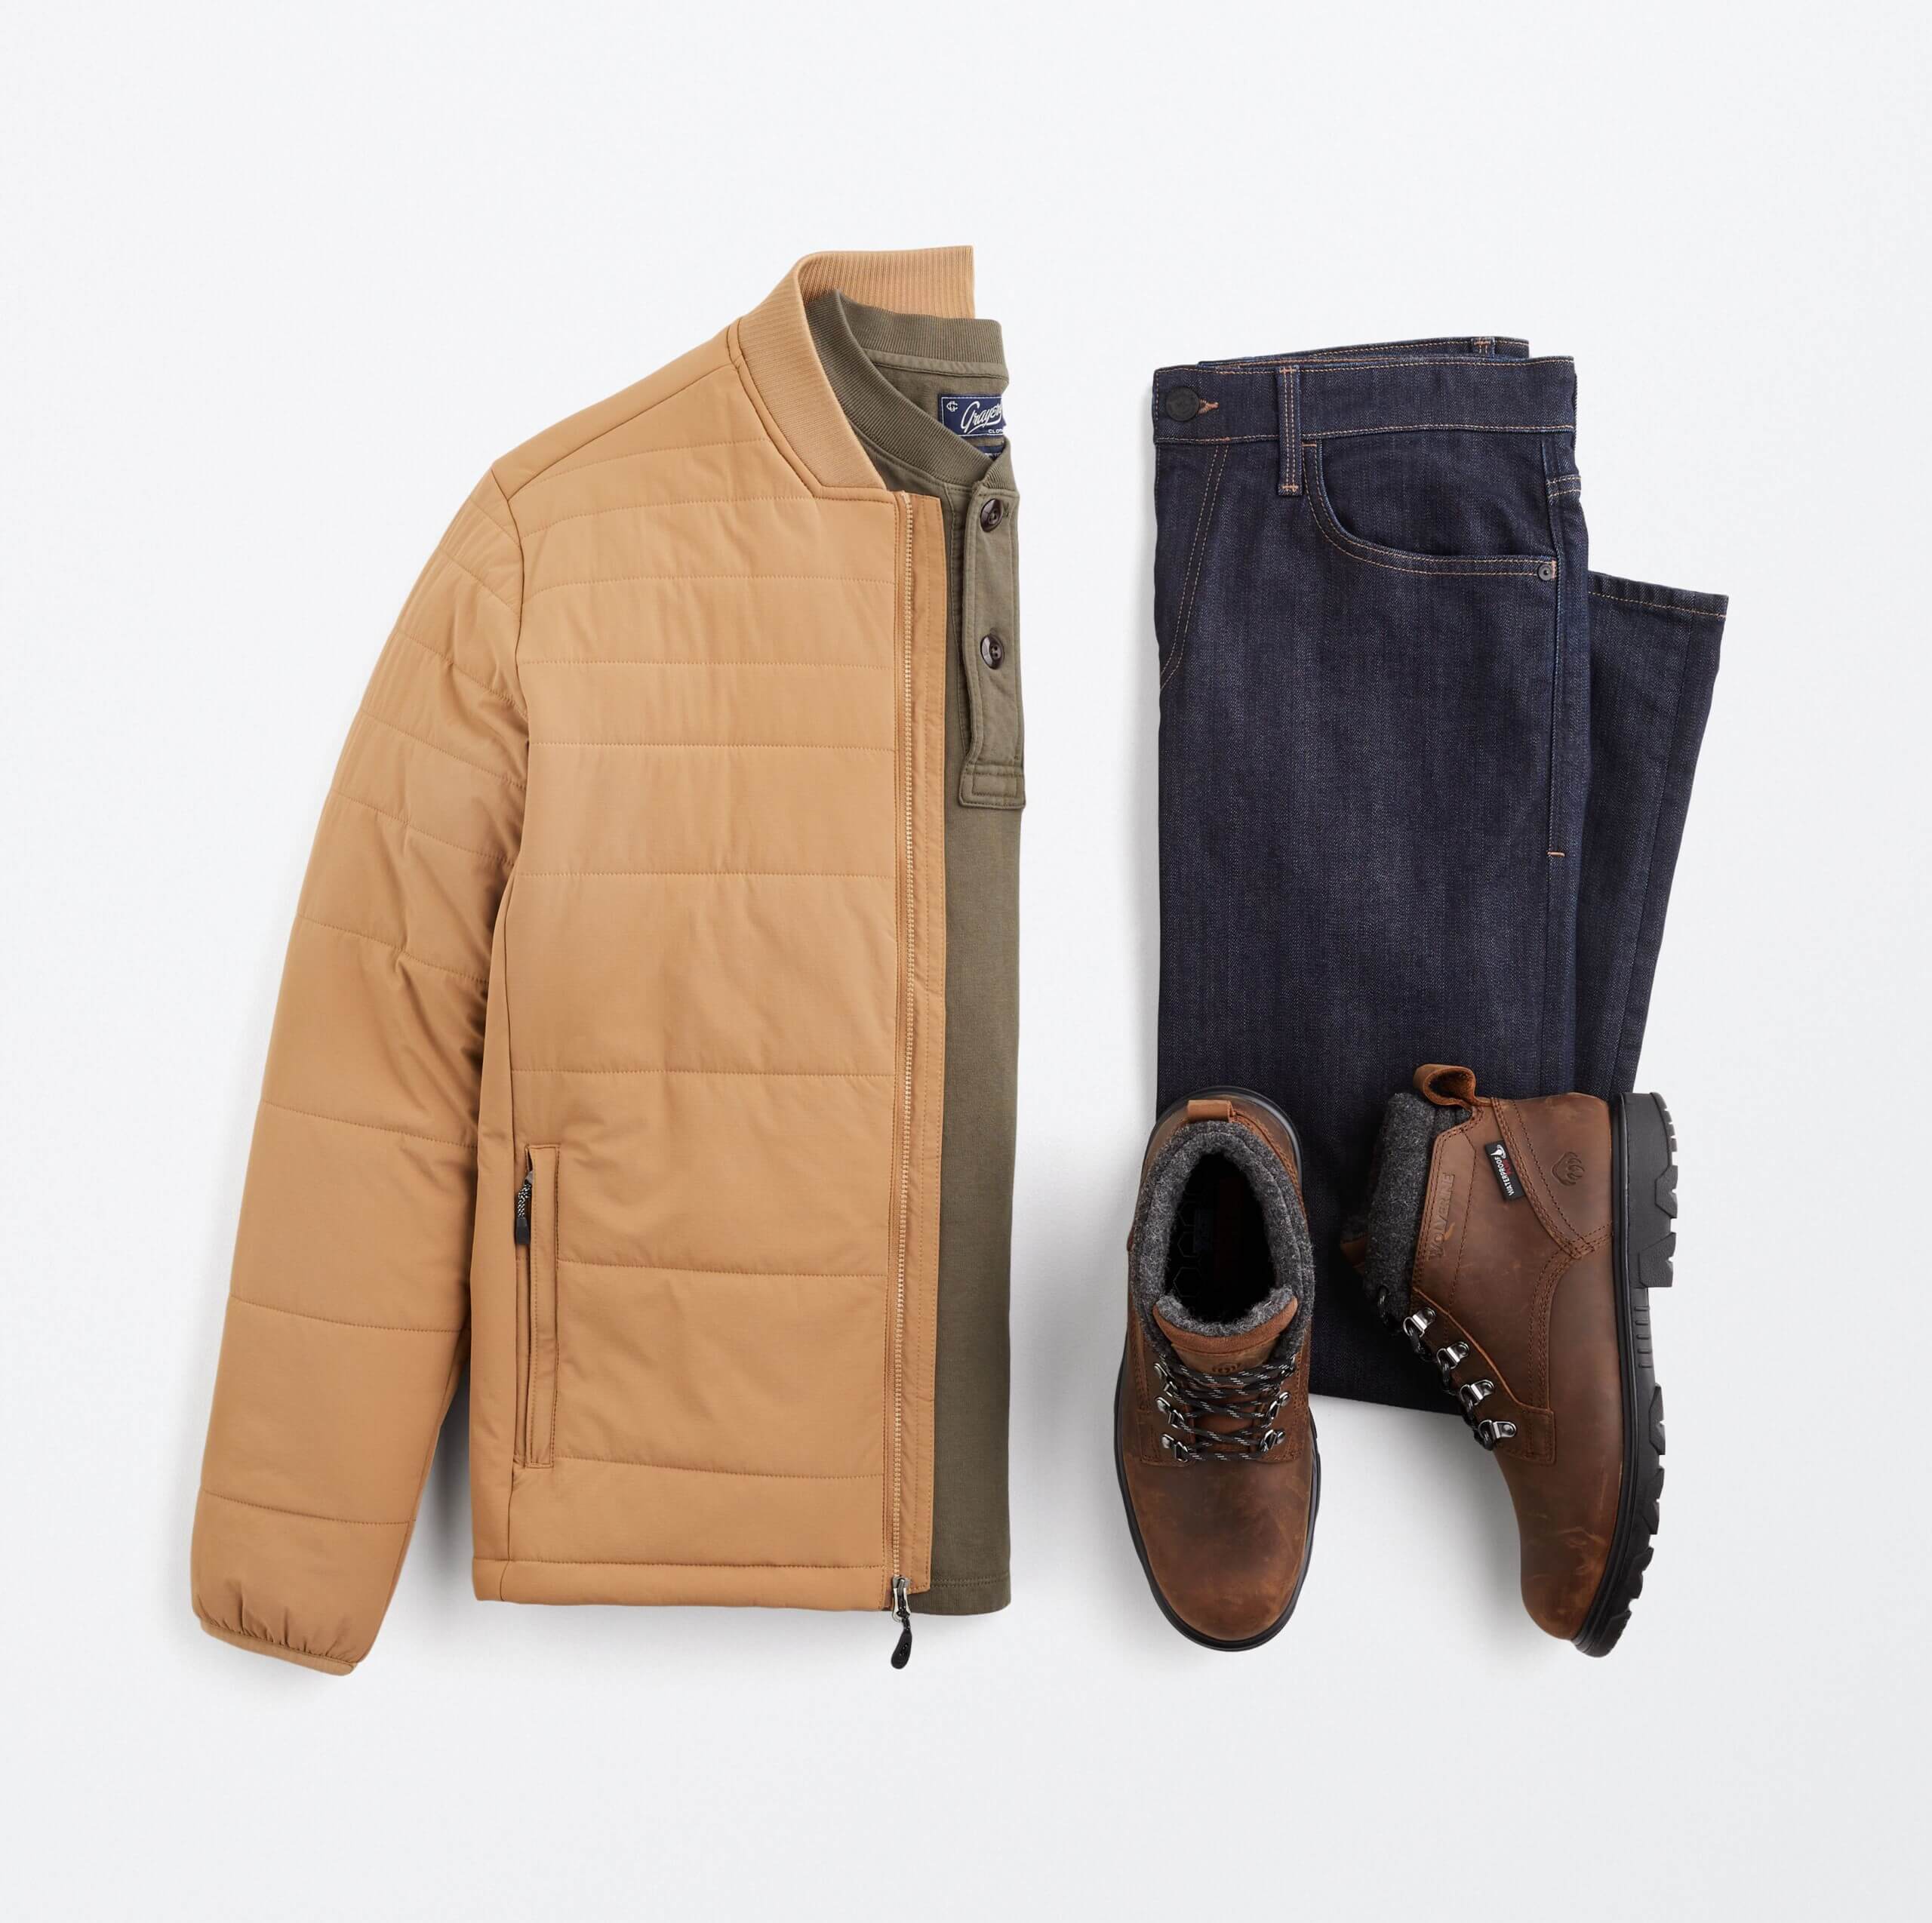 Stitch Fix men’s big and tall outfit with olive henley, tan puffer jacket, blue jeans and brown hiking boots.